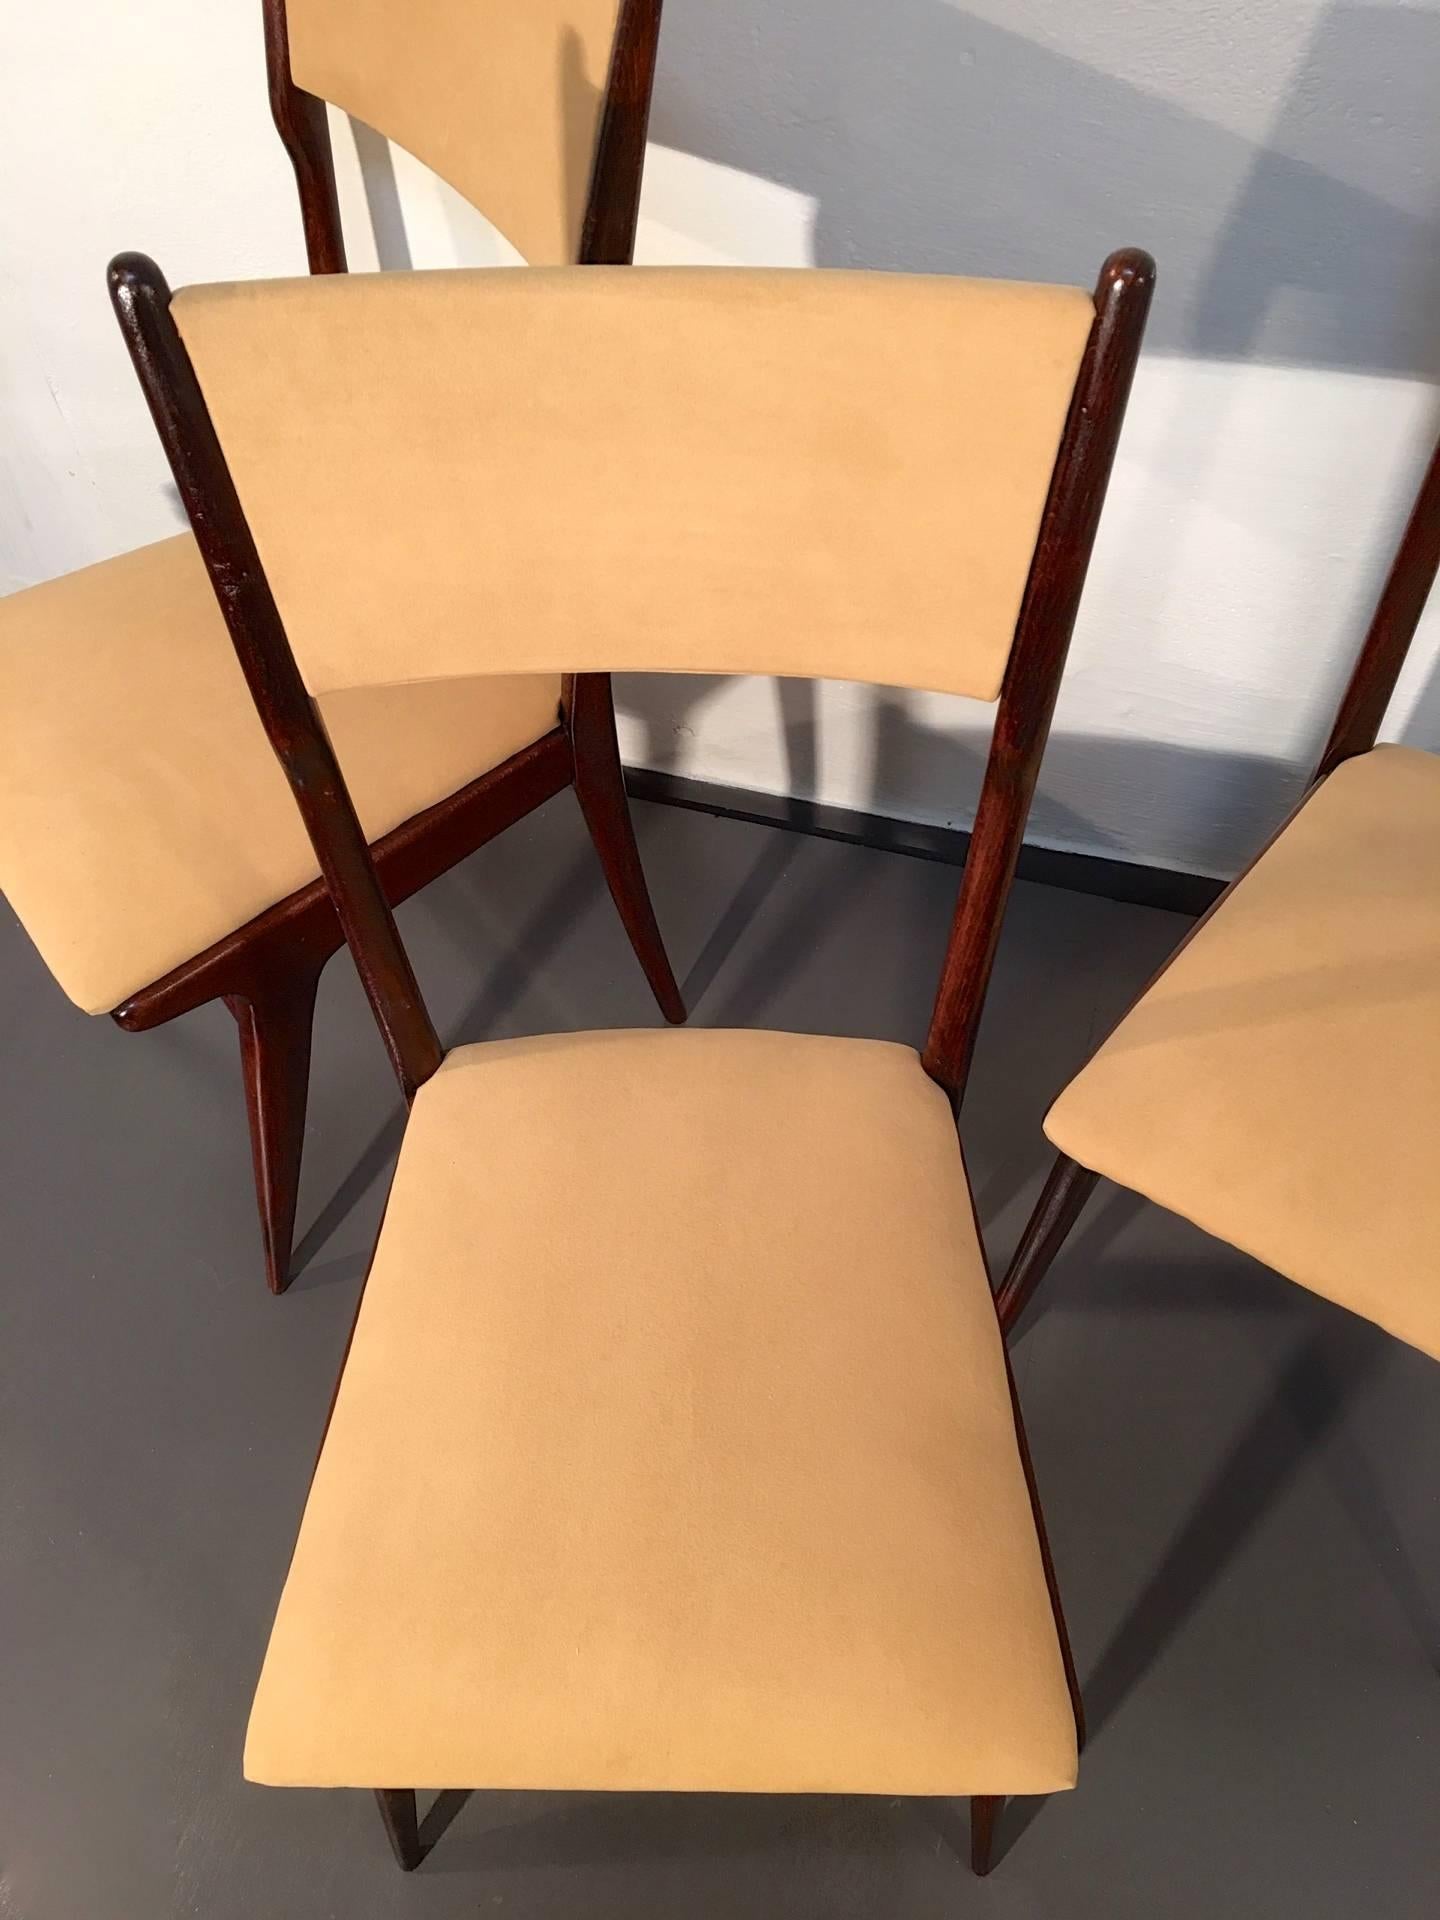 Other Set of Four Chairs, Style of Carlo de Carli for Cassina, 1957 For Sale